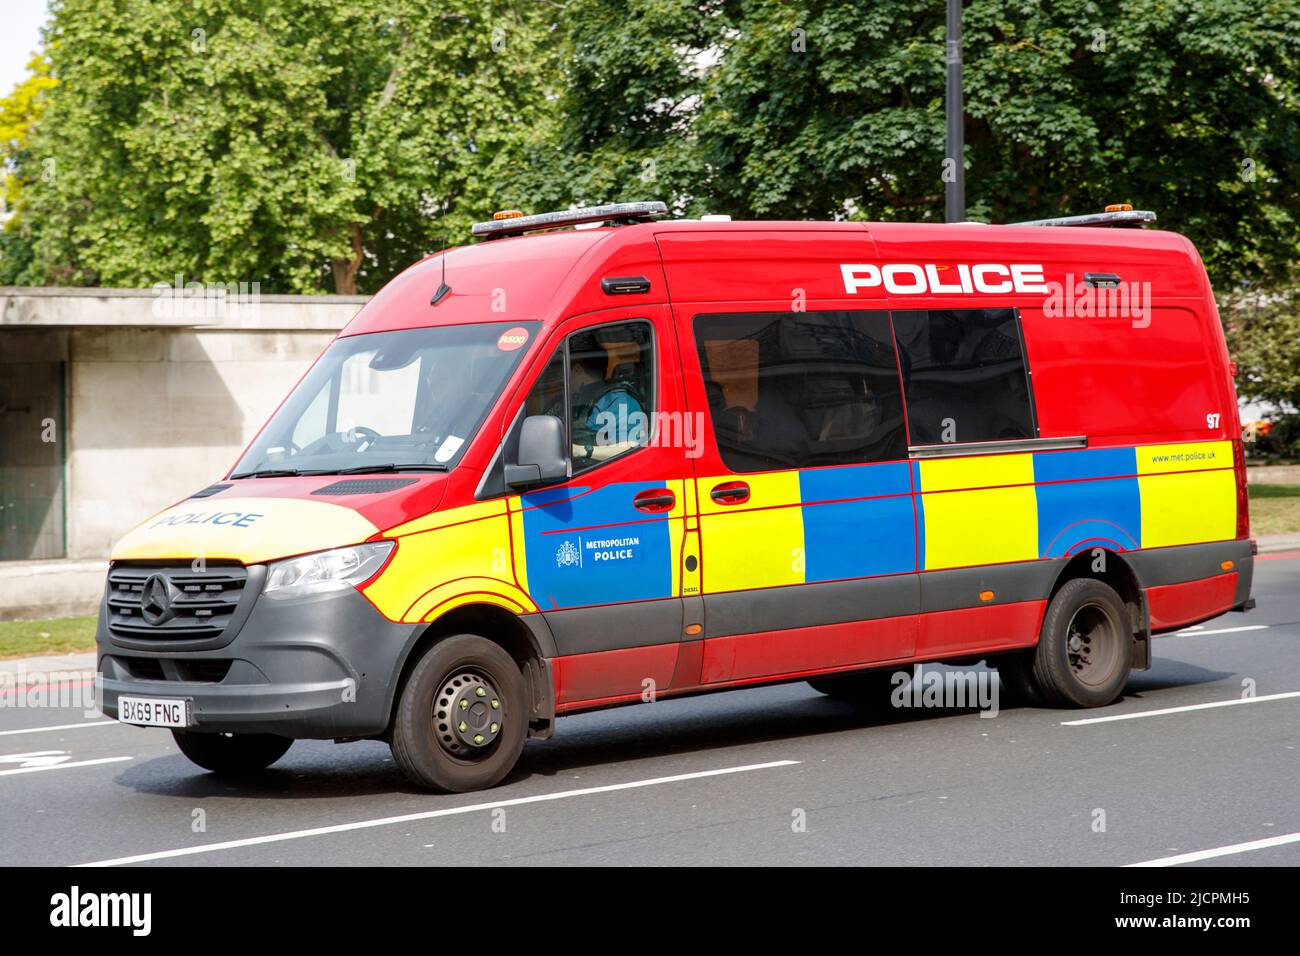 Diplomatic Protection Police Van in London, England, United Kingdom on Wednesday, May 18, 2022.Photo: David Rowland / One-Image.com Stock Photo